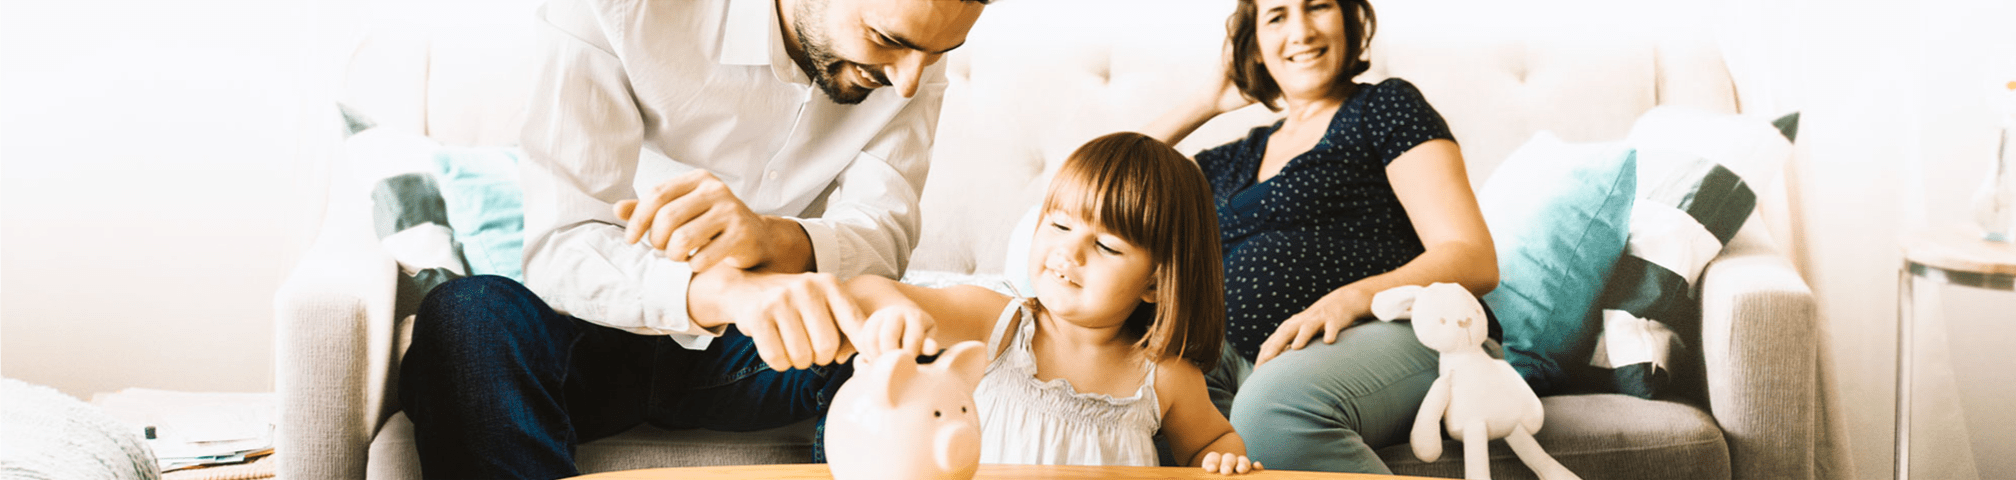 Little girl putting money in piggy bank with smiling parents in the background